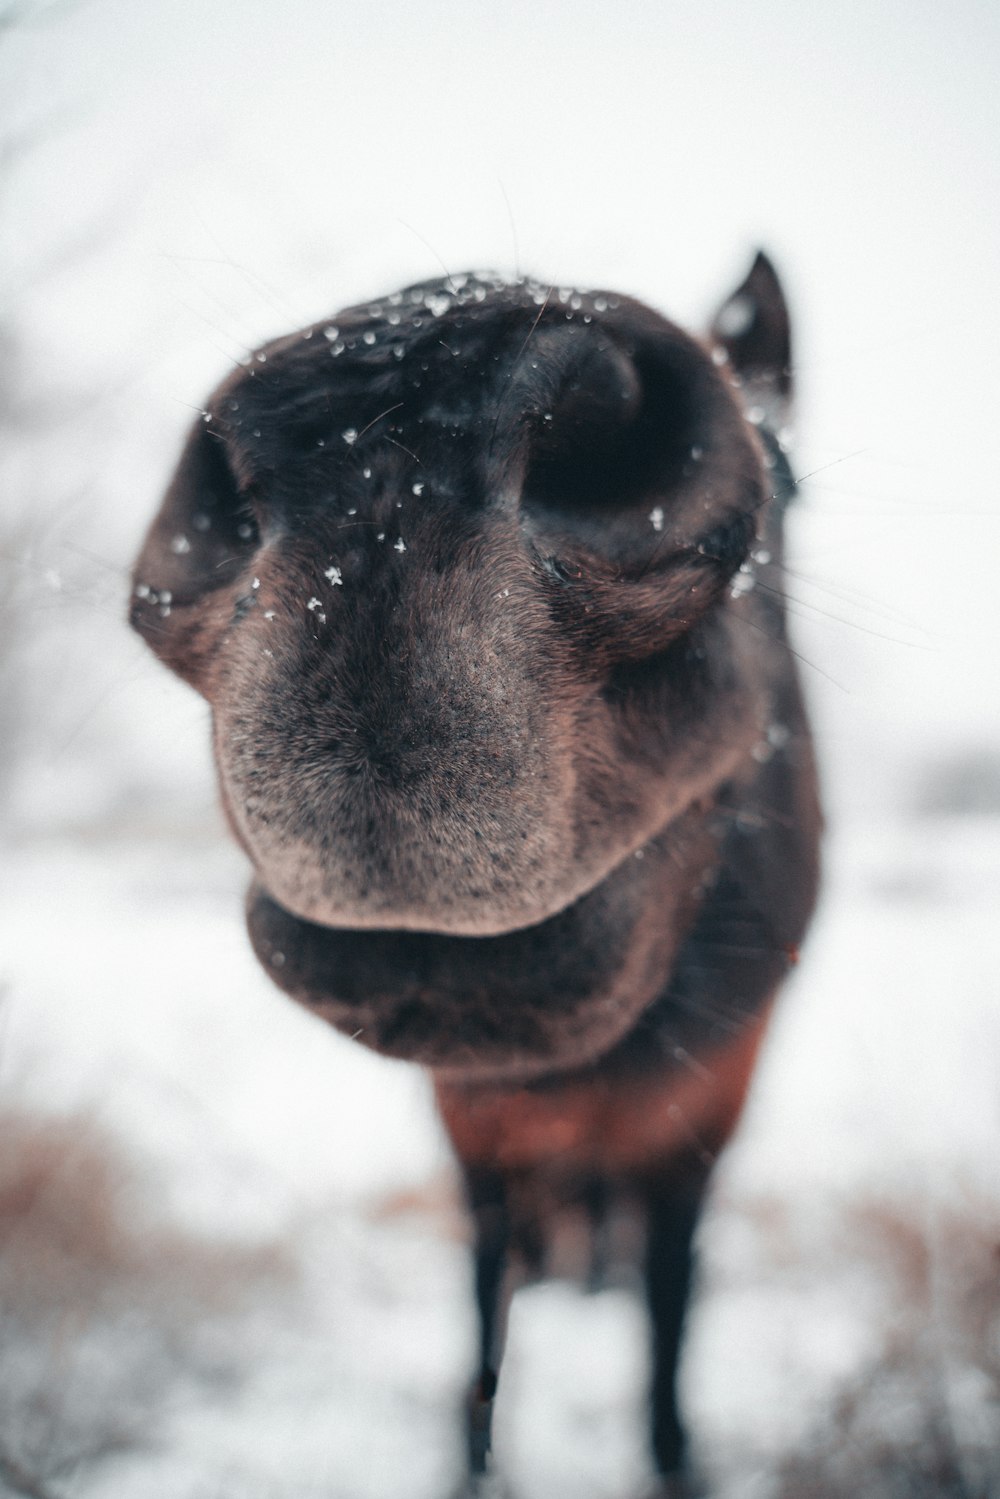 a close up of a horse in the snow